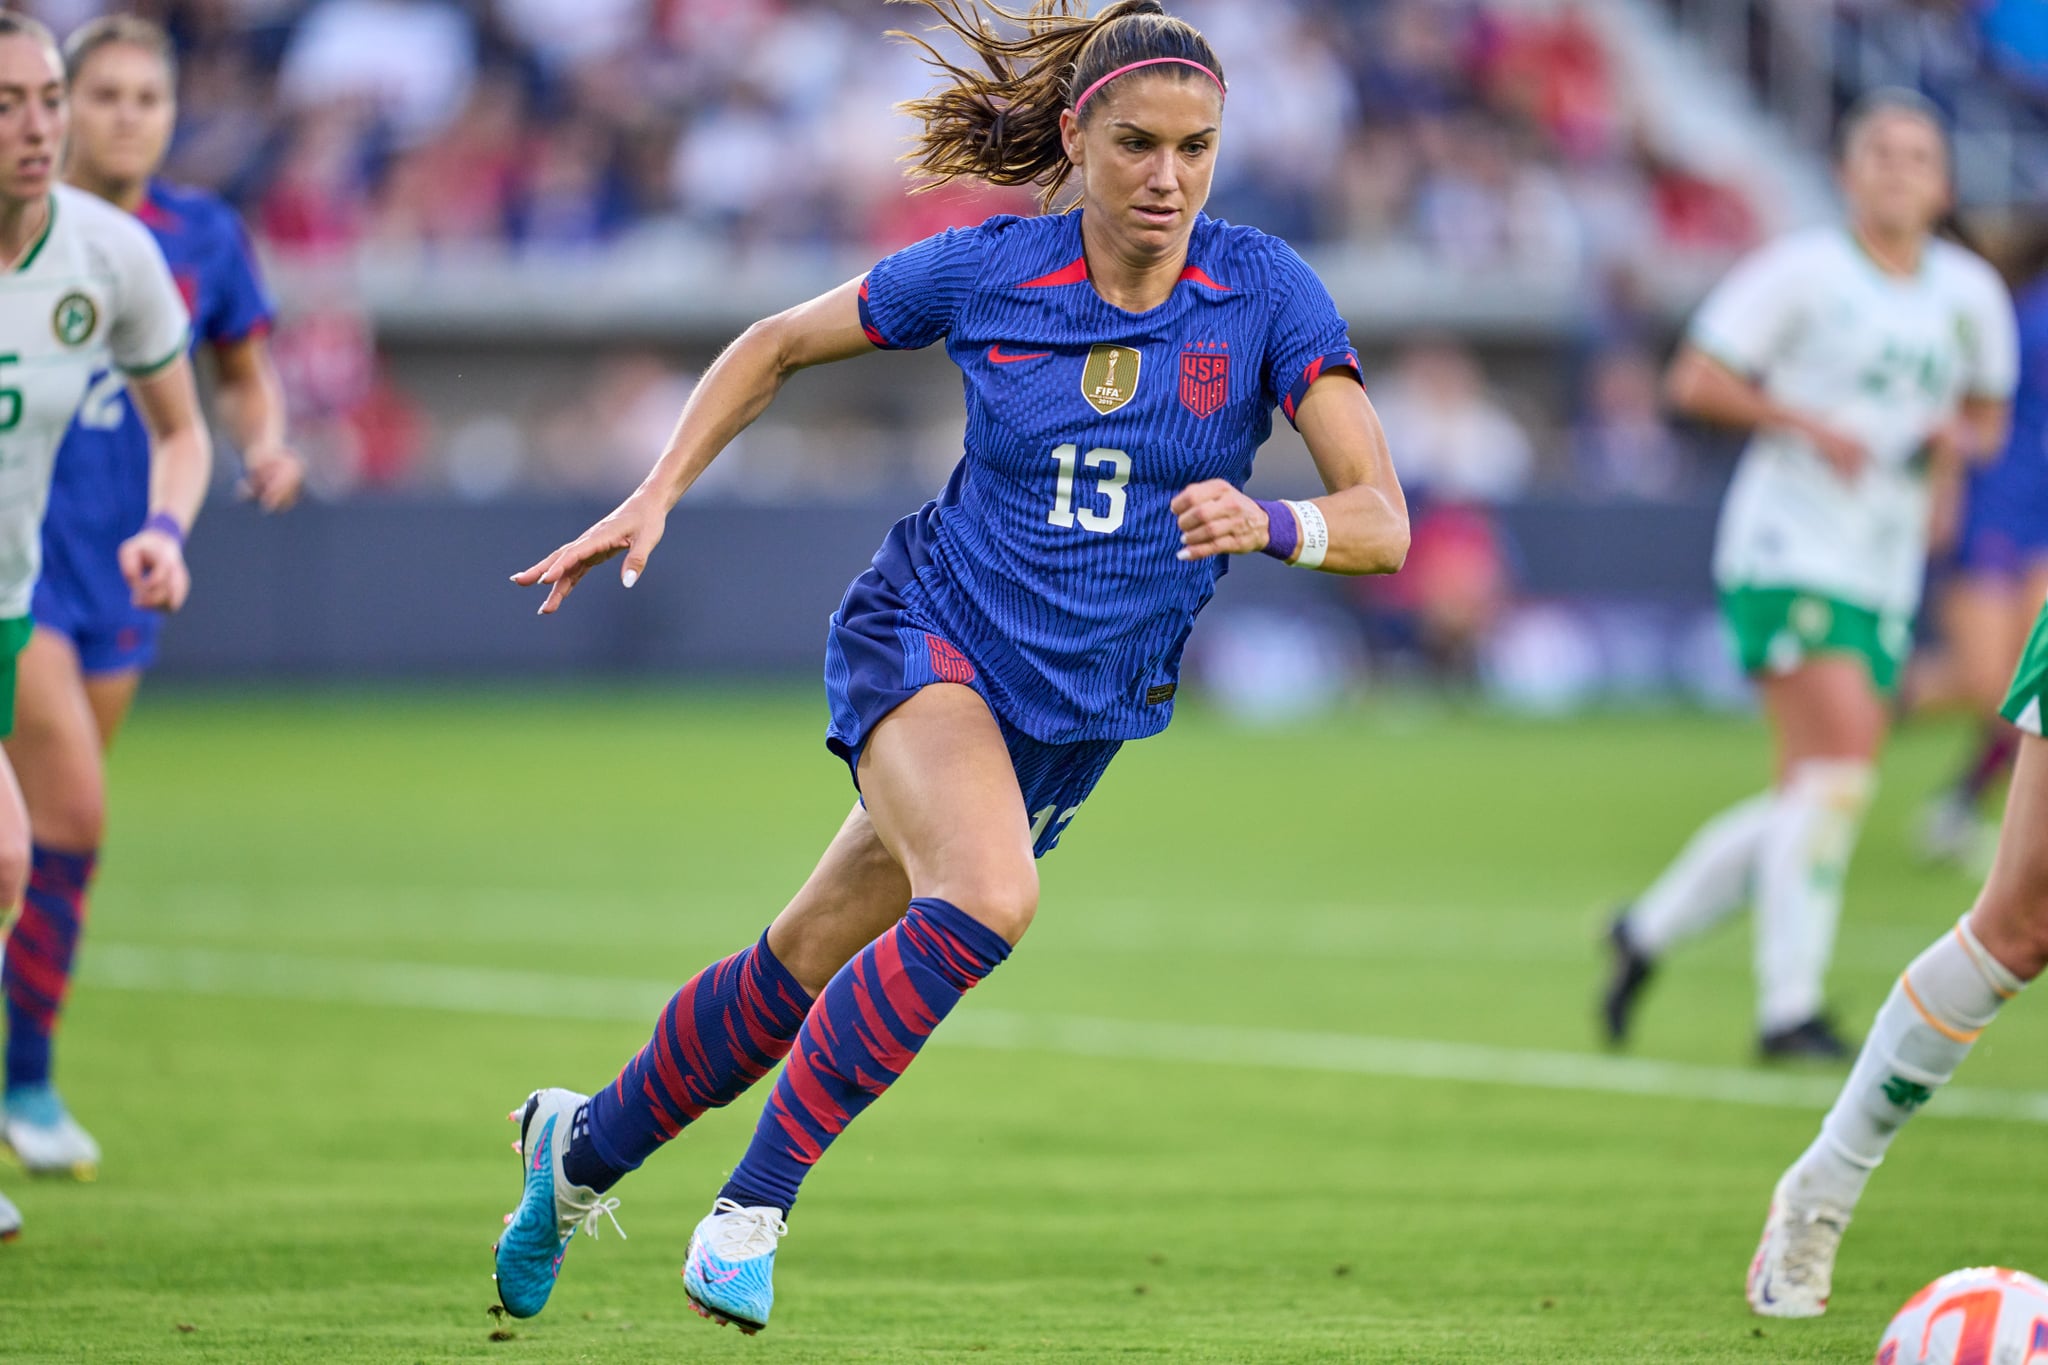 ST. LOUIS, MO - APRIL 11: Alex Morgan #13 of the USA races towards the goal during an international friendly game between Ireland and United States at CITYPARK on April 11, 2023 in St. Louis, Missouri. (Photo by Robin Alam/ISI Photos/Getty Images).